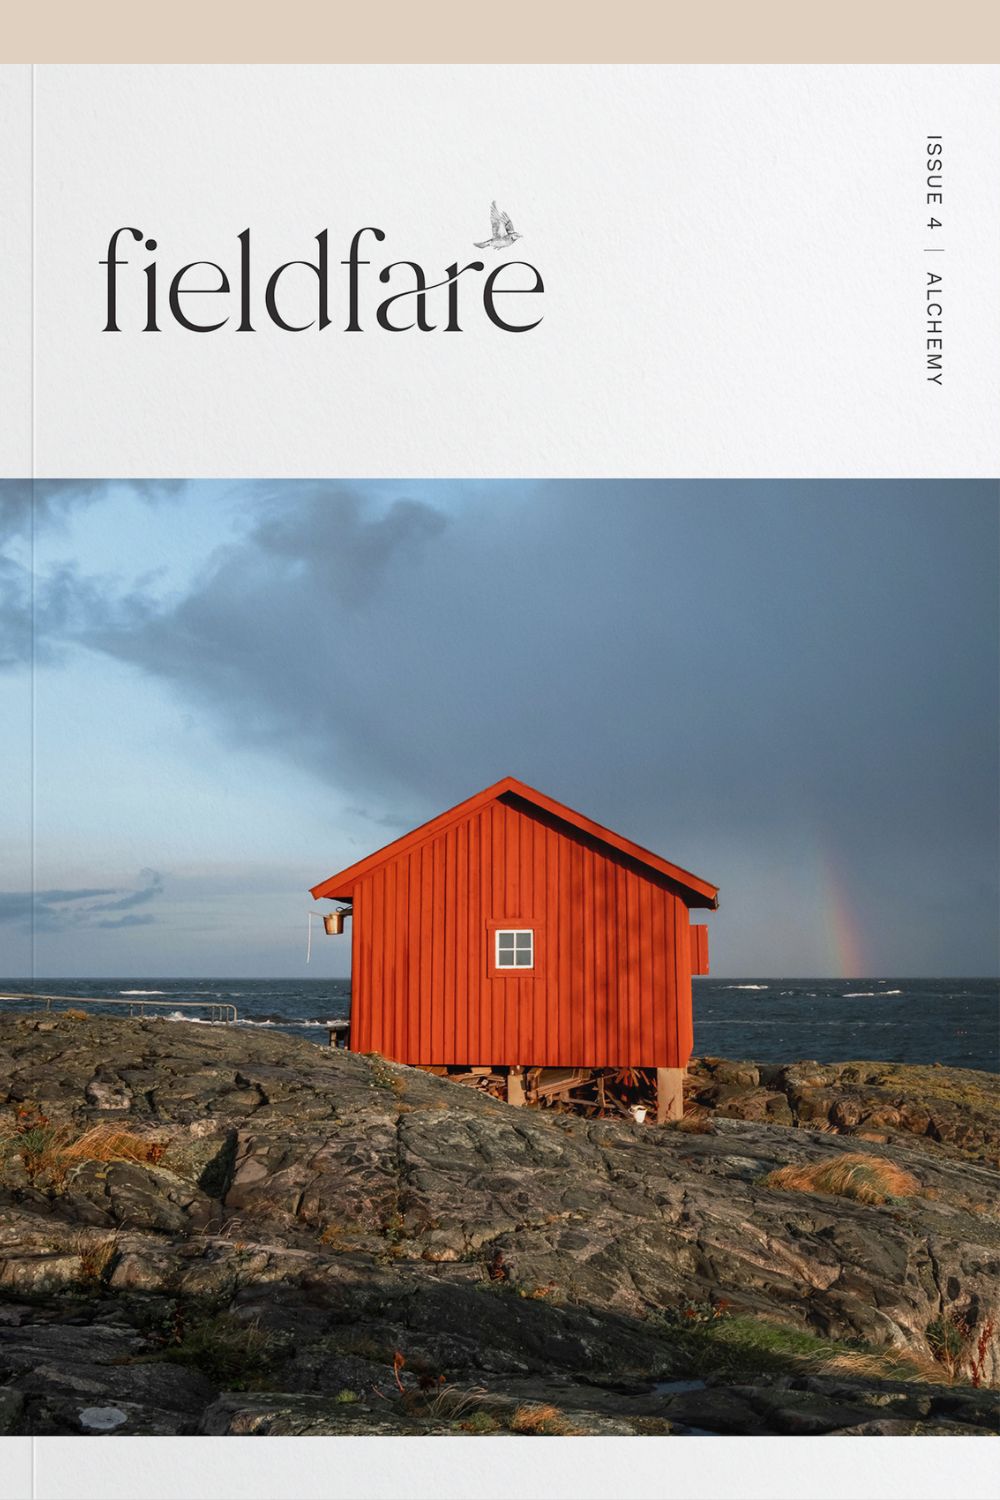 Fieldfare magazine Issue 4 cover (red shed on a rocky coastline)